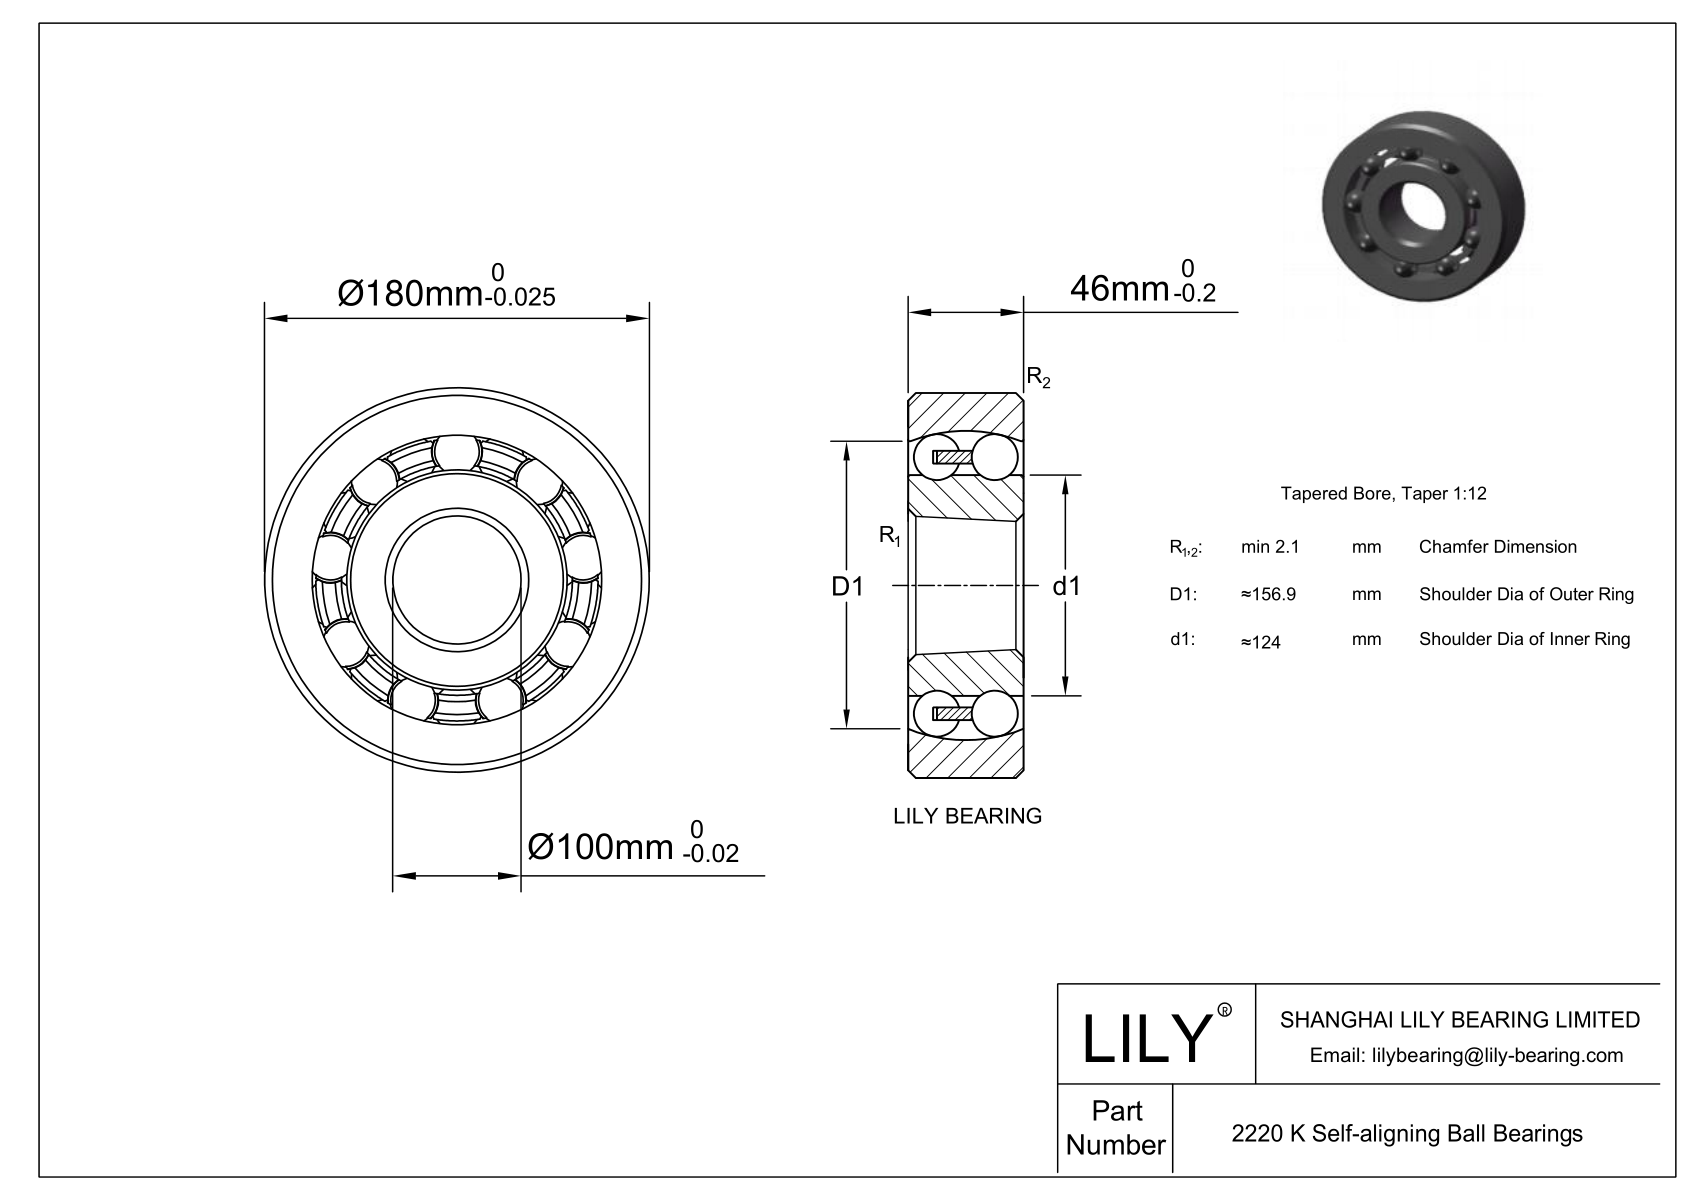 S2220 K Stainless Steel Self Aligning Ball Bearings cad drawing